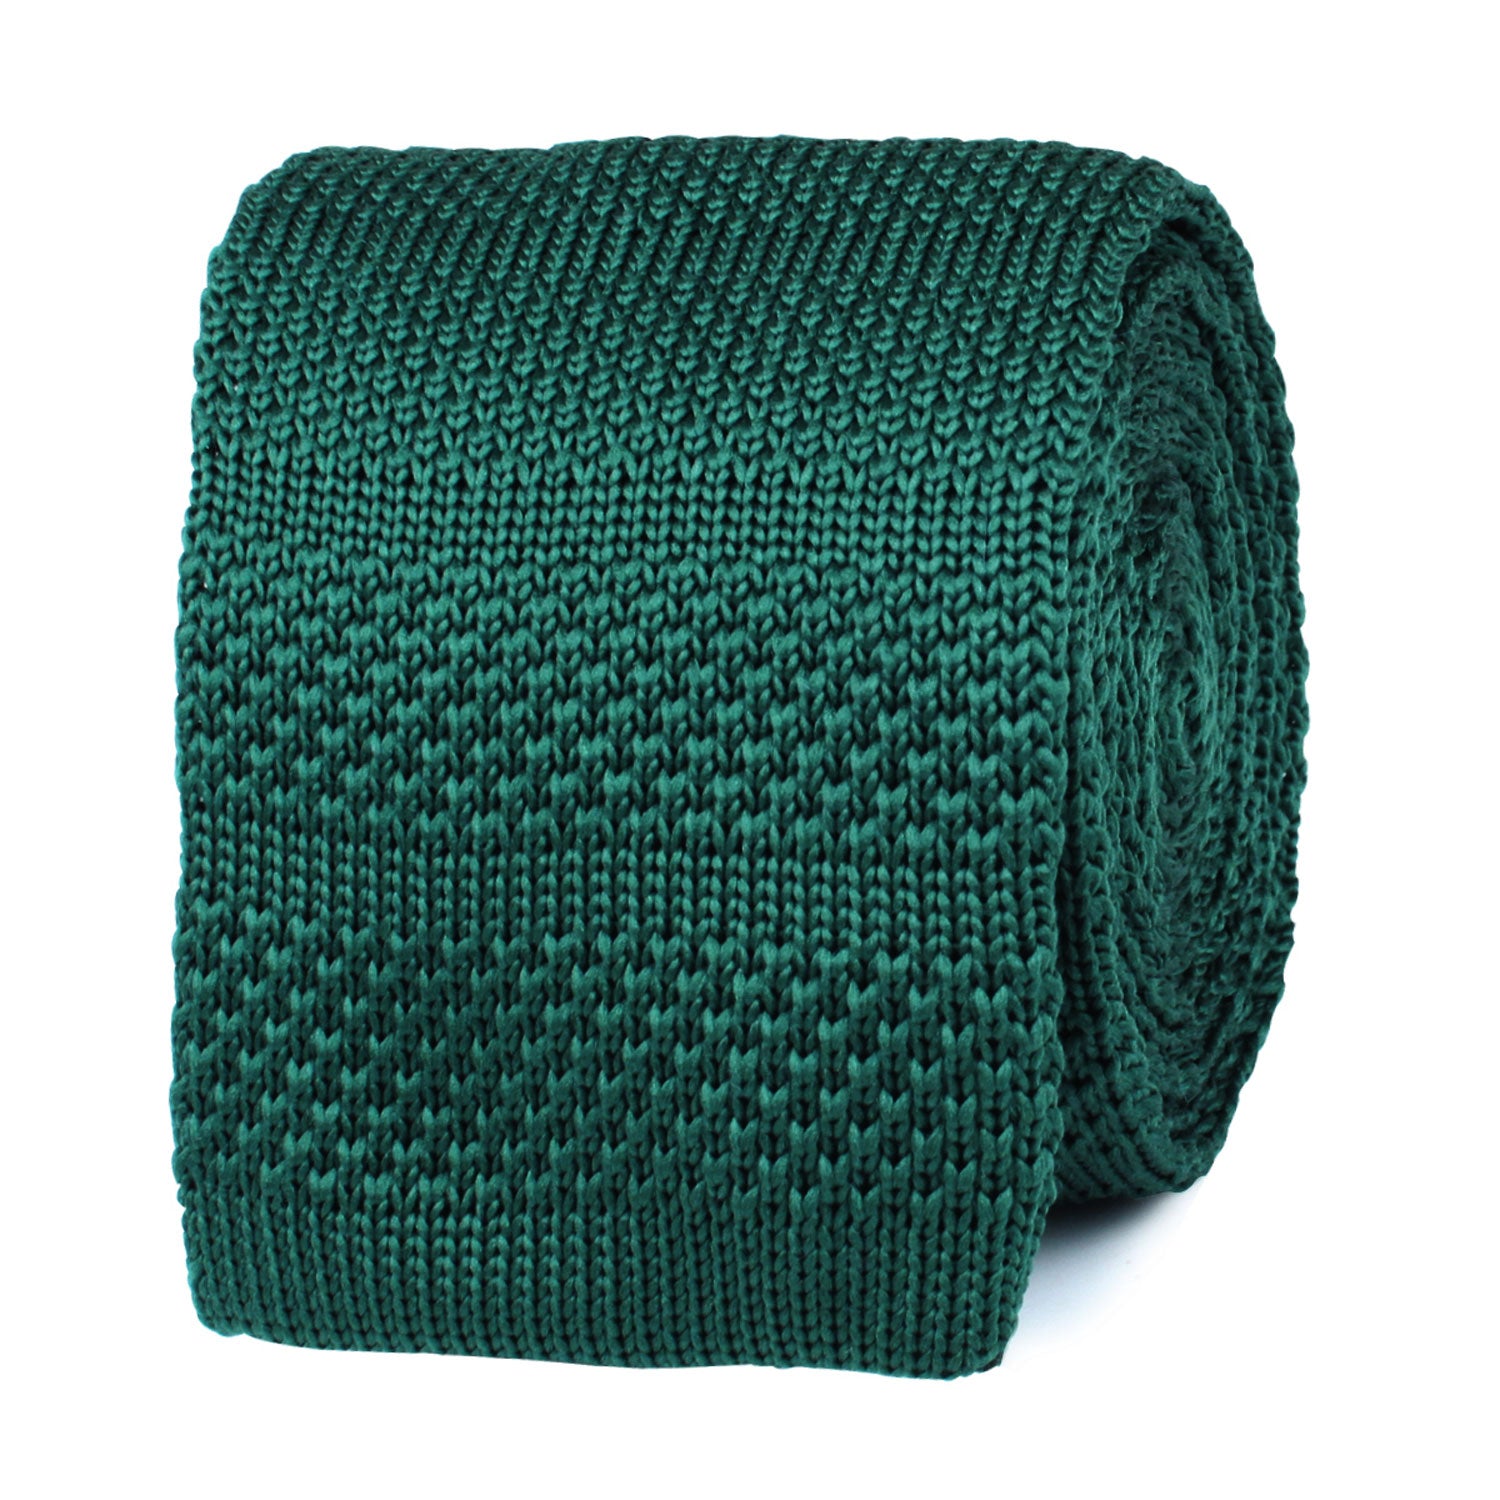 Exeter Green Knitted Tie